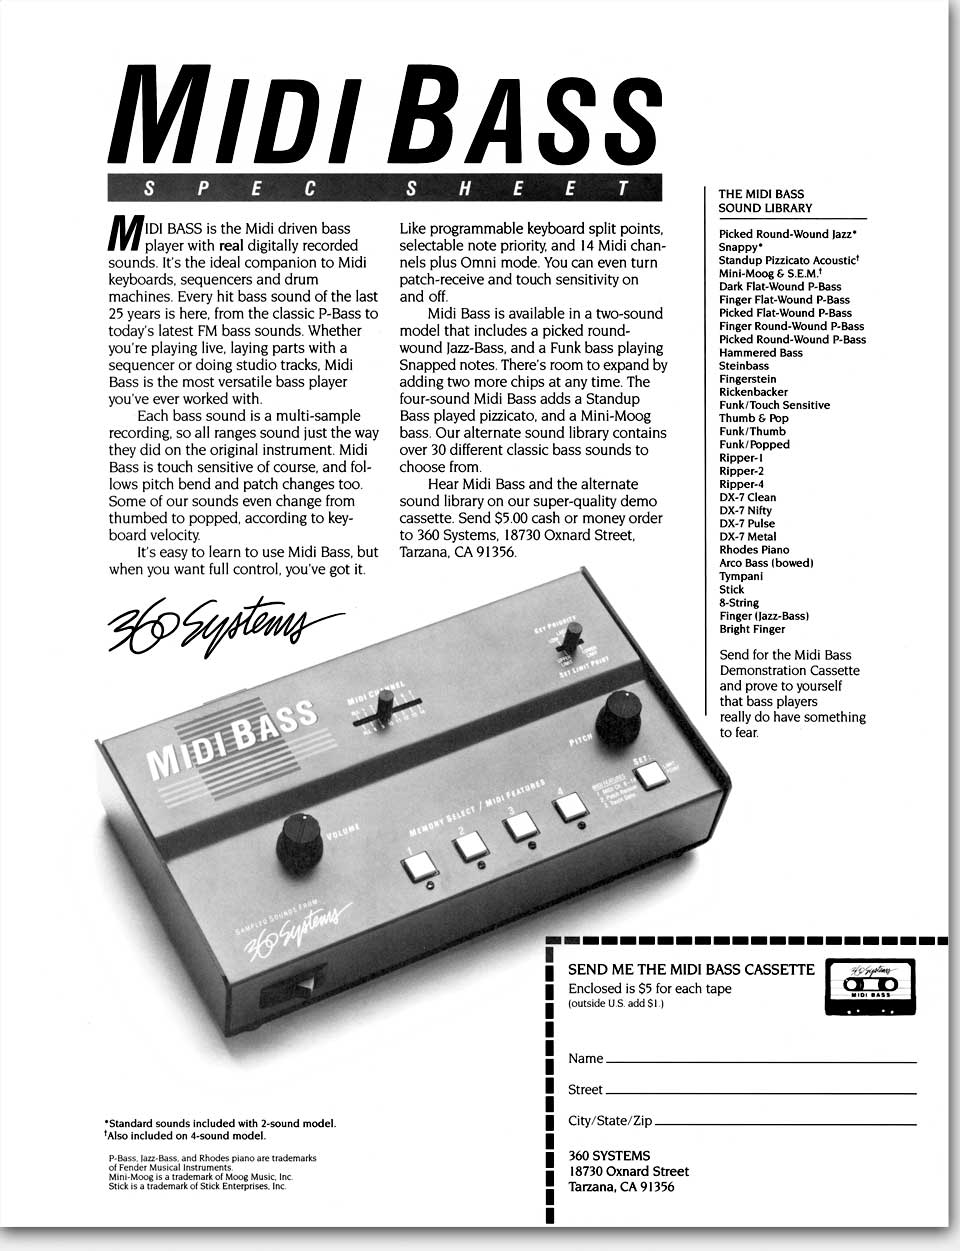 Original data sheet for the Midi Bass by 360 Systems, mid-1980s. Eric Wrobbel Design. The Midi Bass is perhaps best known for that distinctive bass sound heard as musical intros and outros on the television show 'Seinfeld.' Other Midi Bass and more vintage gear: https://www.ericwrobbel.com/art/360datasheets.htm